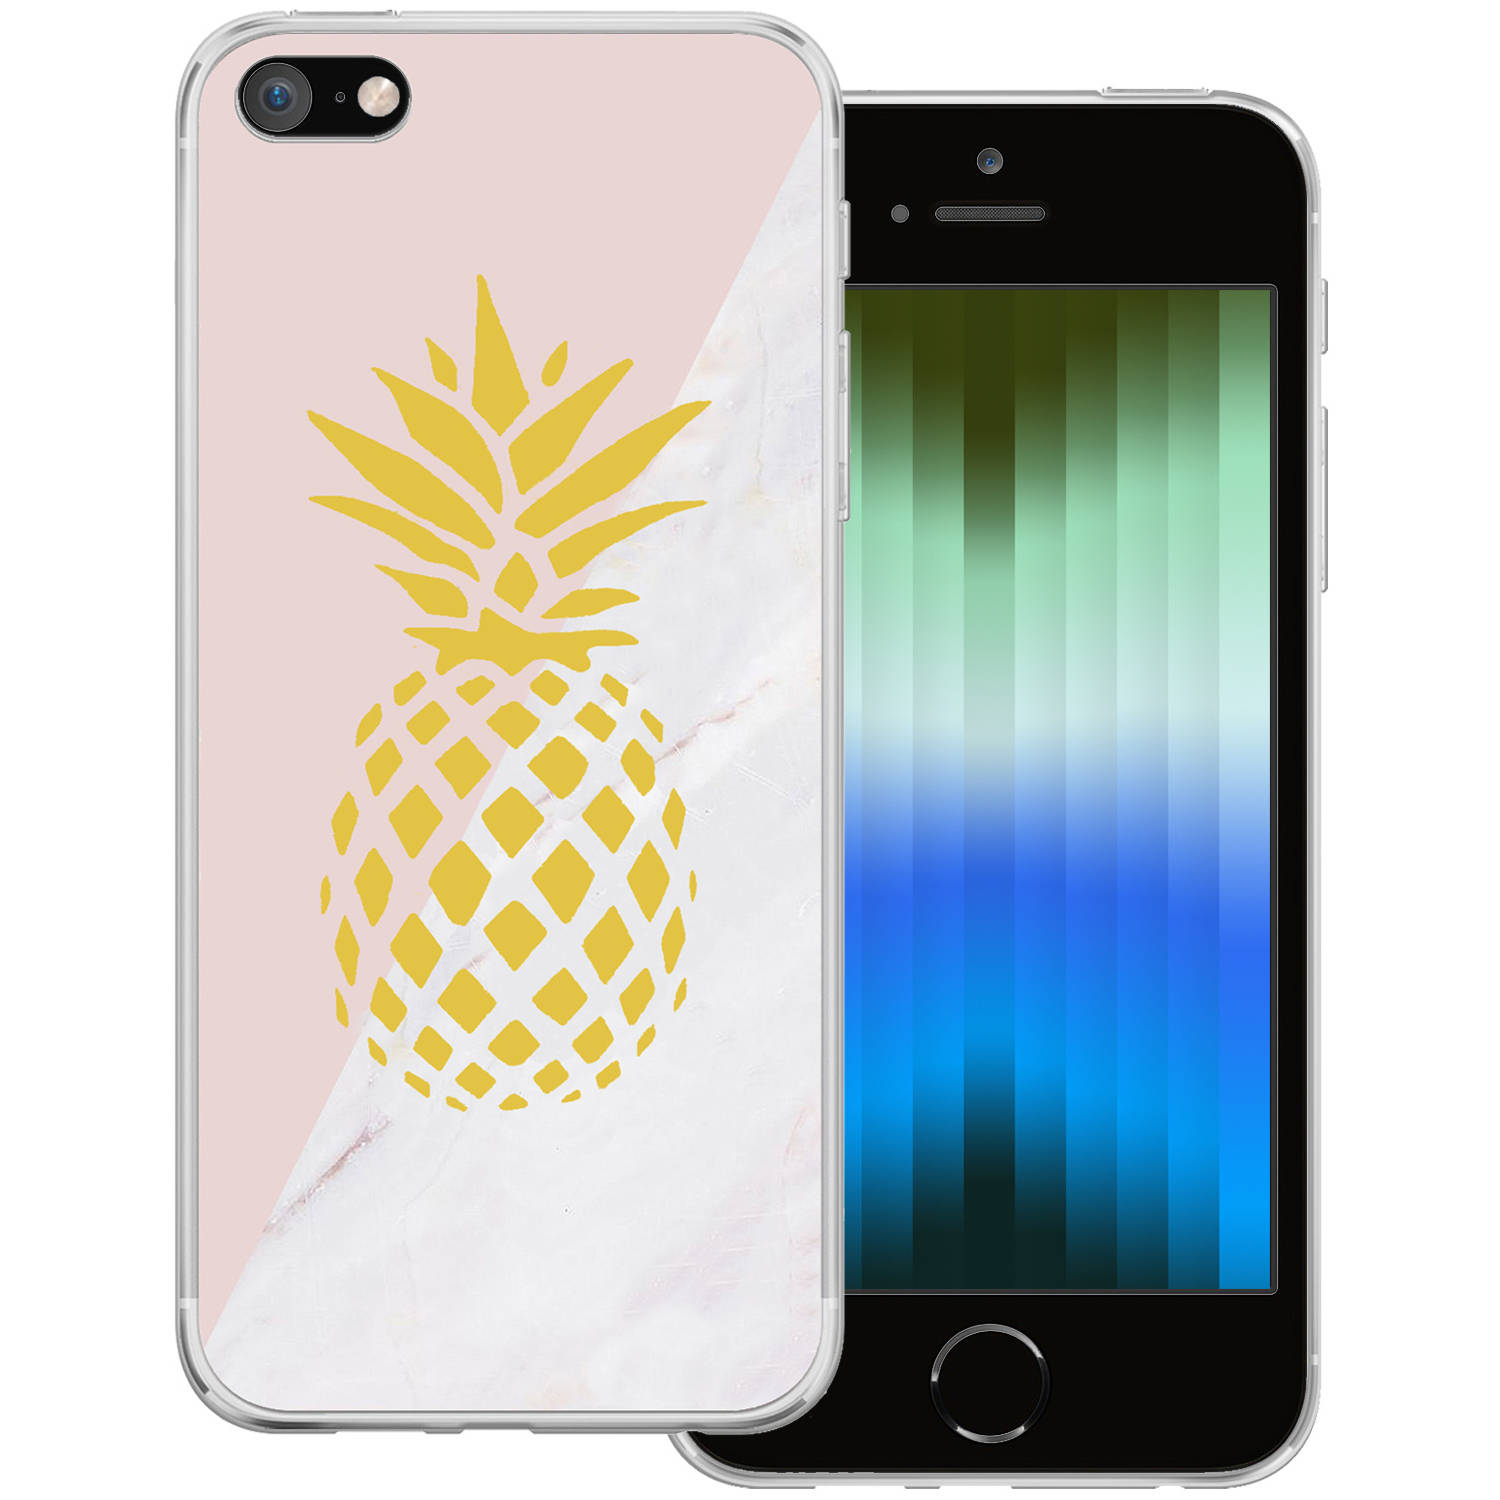 Basey Apple iPhone SE (2022) Hoesje Siliconen Hoes Case Cover Apple iPhone SE (2022)-Ananas